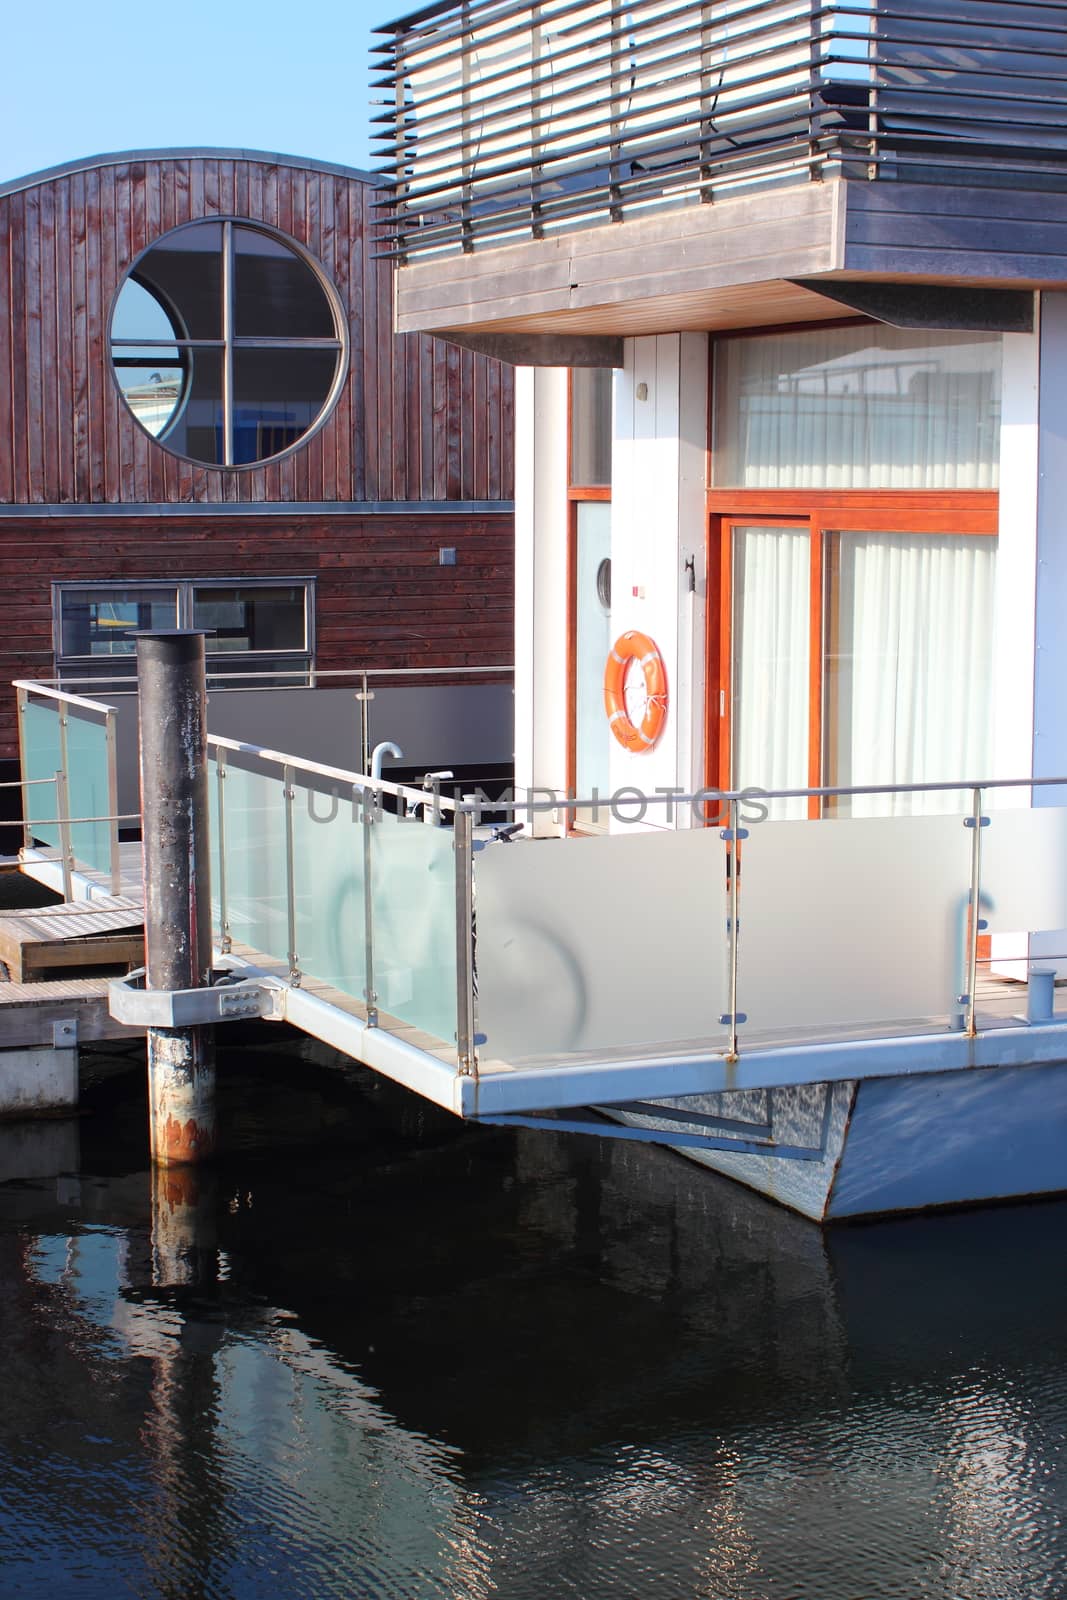 Houseboat with orange lifesaver at the porch by HoleInTheBox